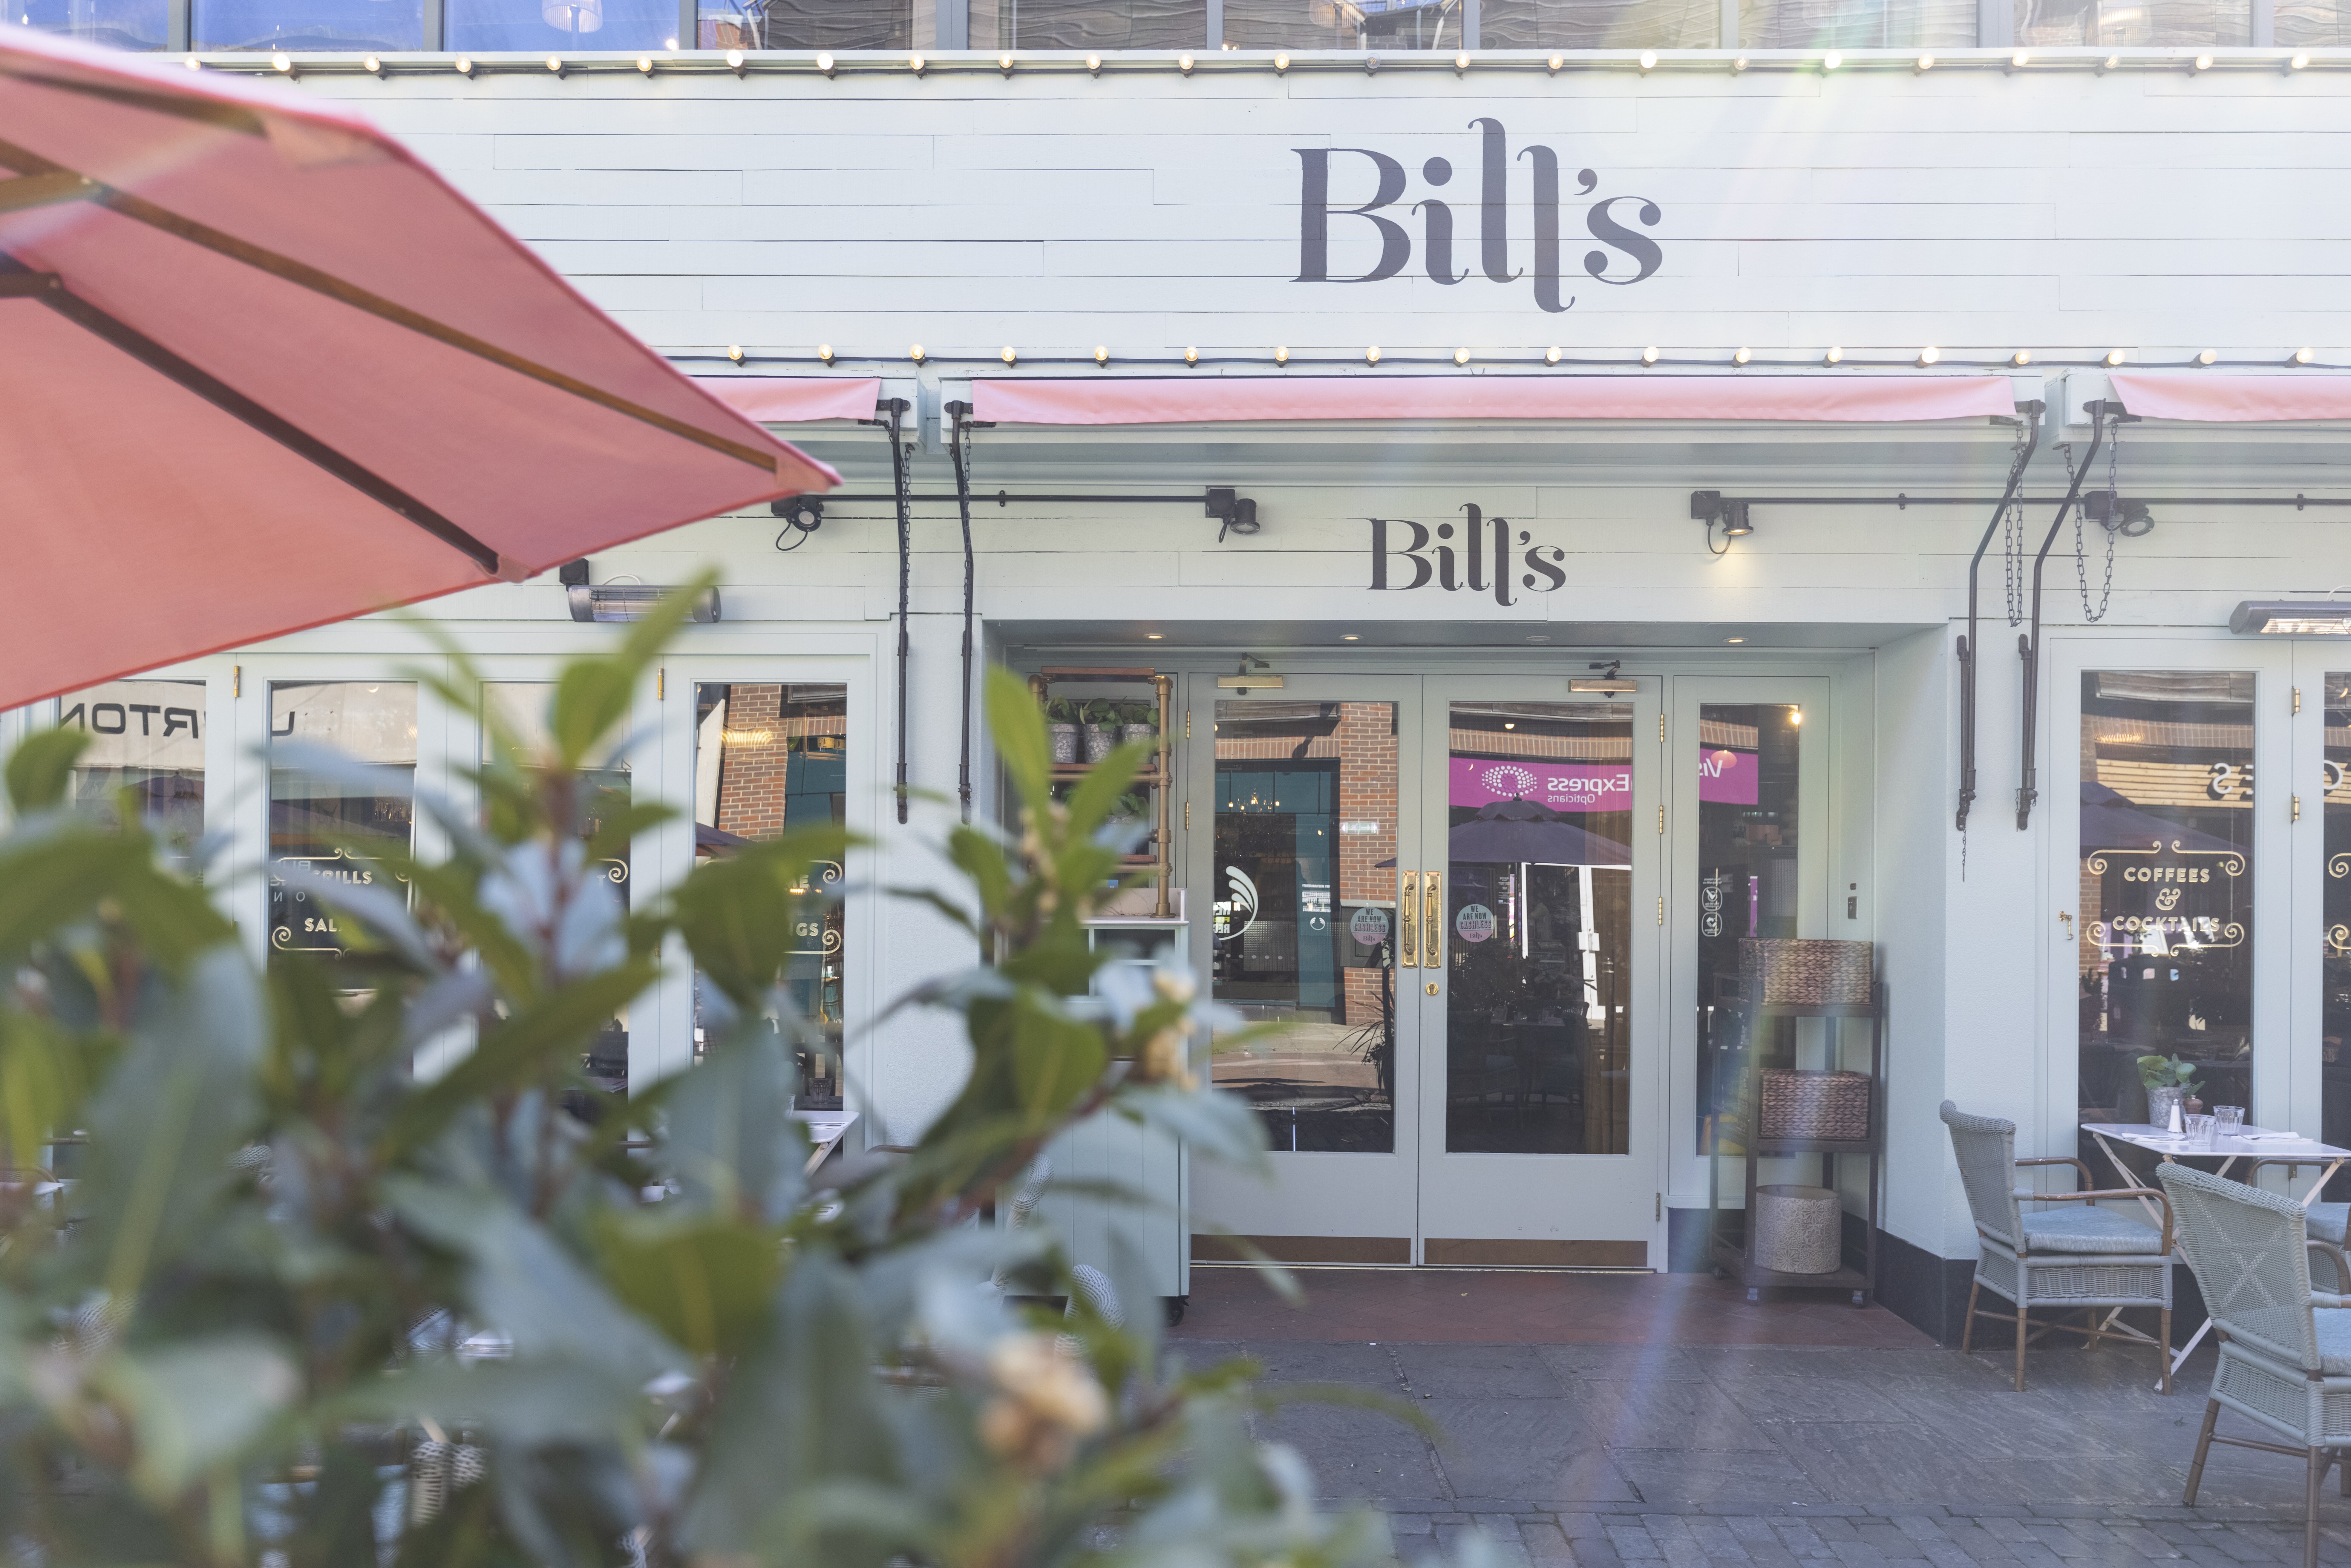 Bill’s ‘back on track’ following boost in sales